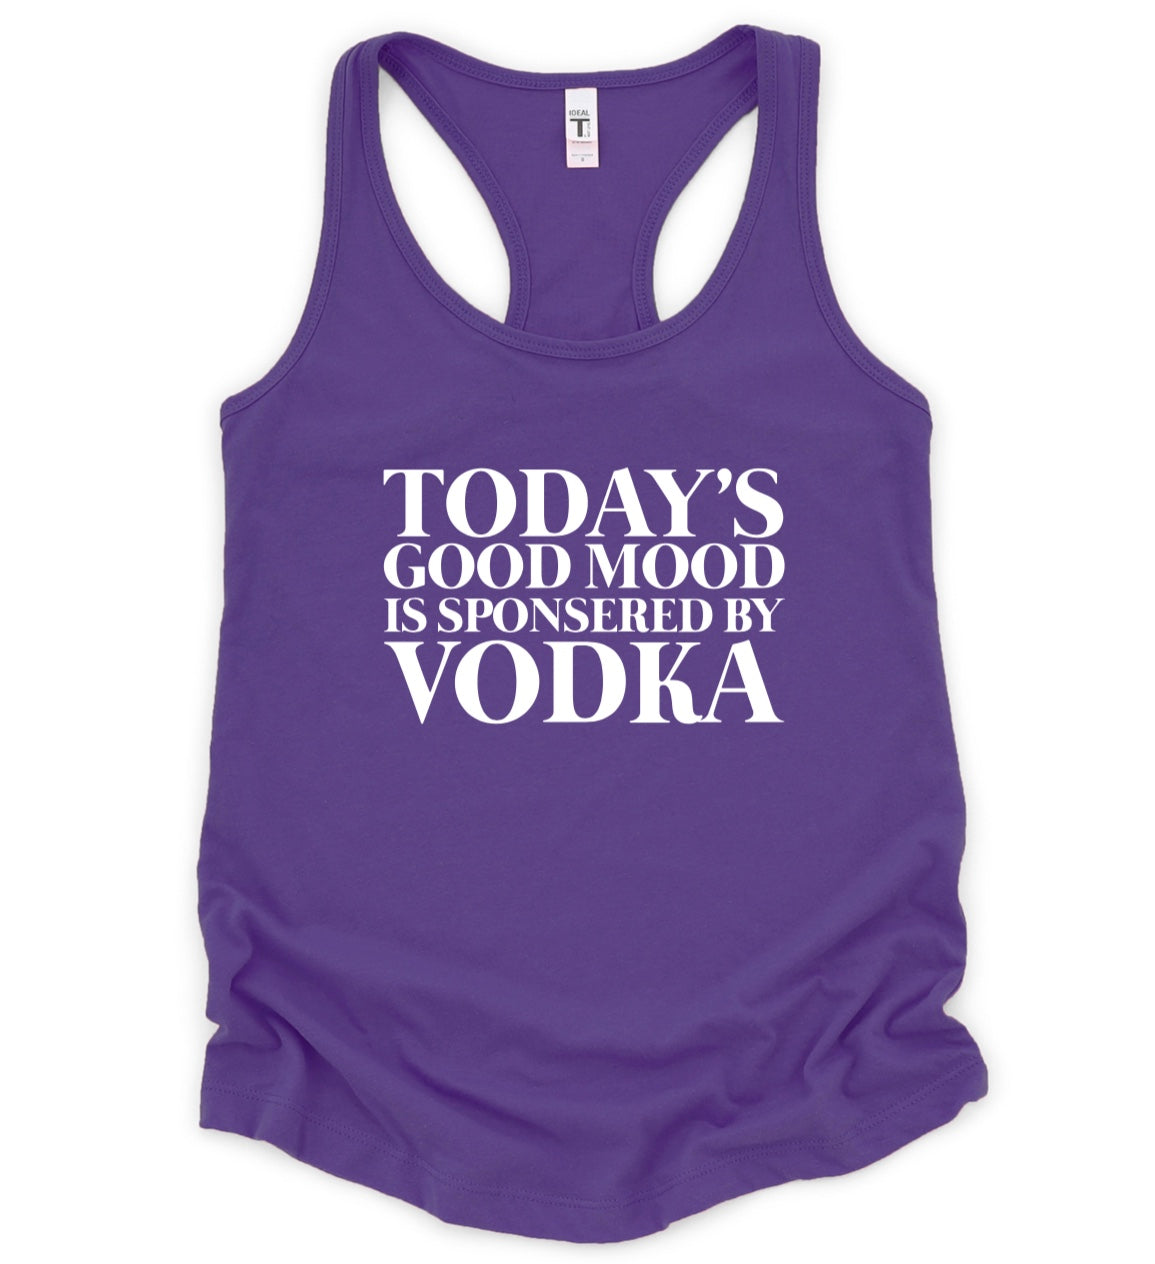 Today’s good mood sponsored by vodka racerback tank top 